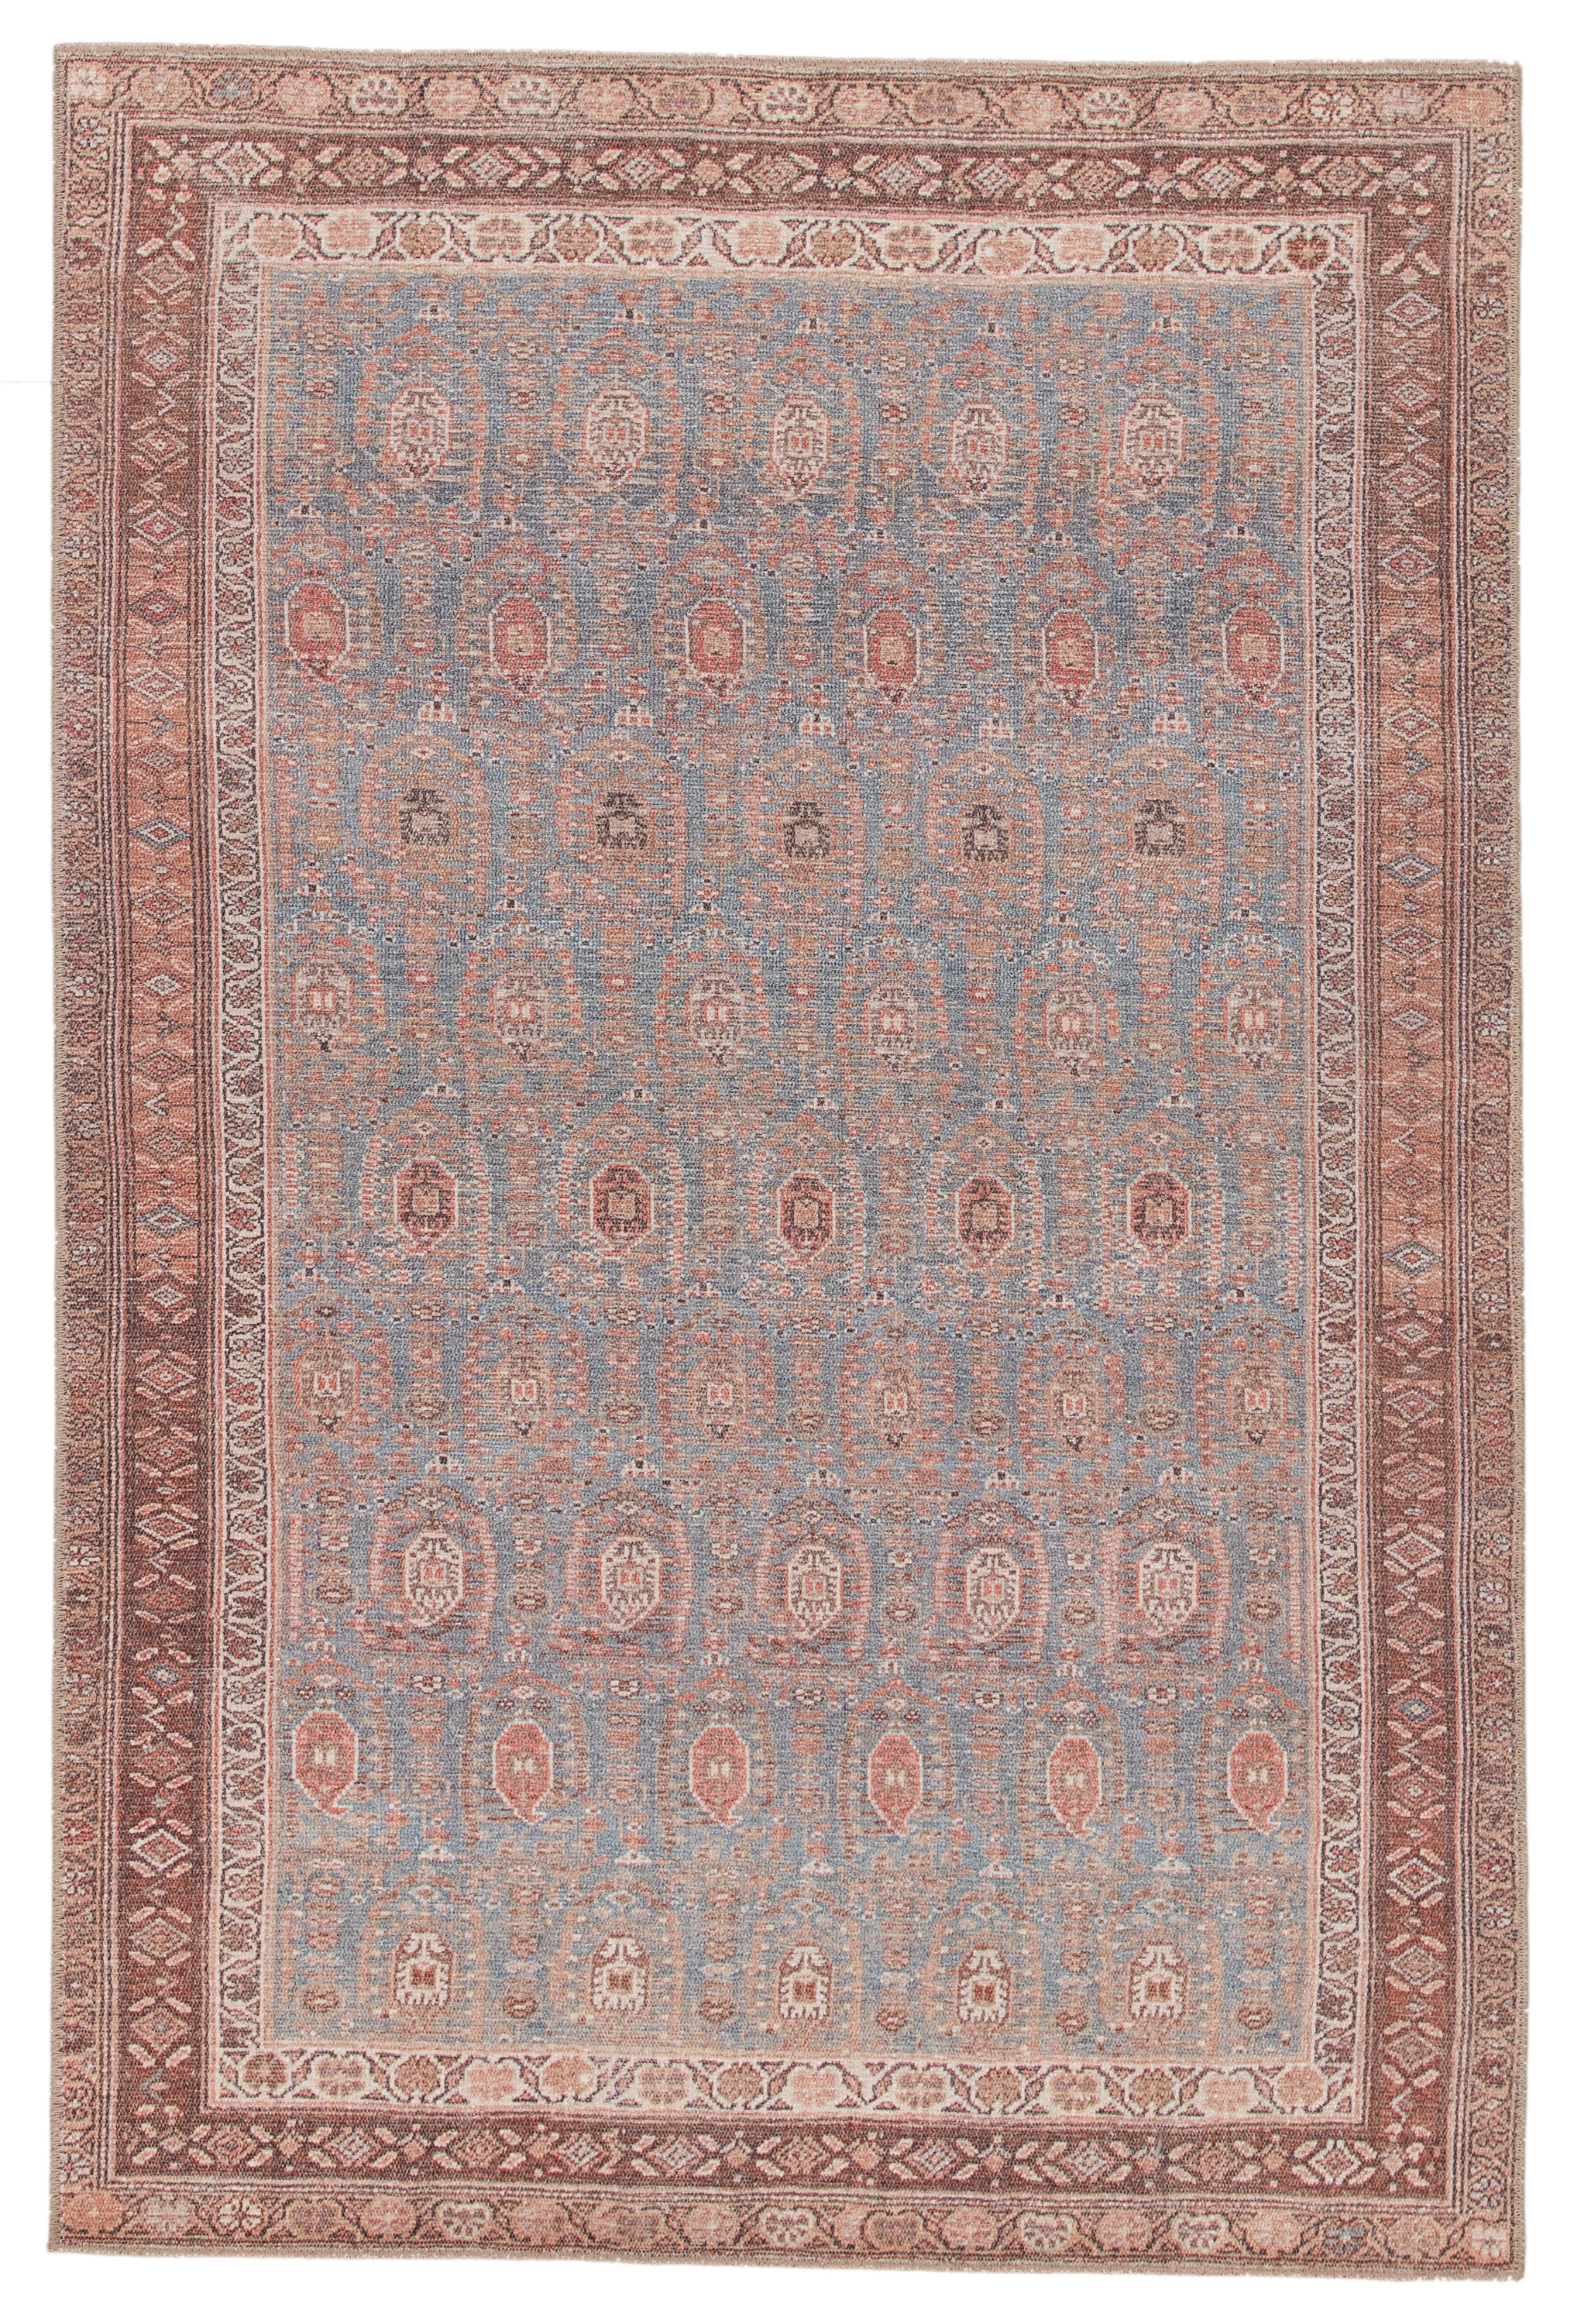 Vibe by Tielo Oriental Area Rug, Blue & Brown, 5 ' x 7'6" - Image 0